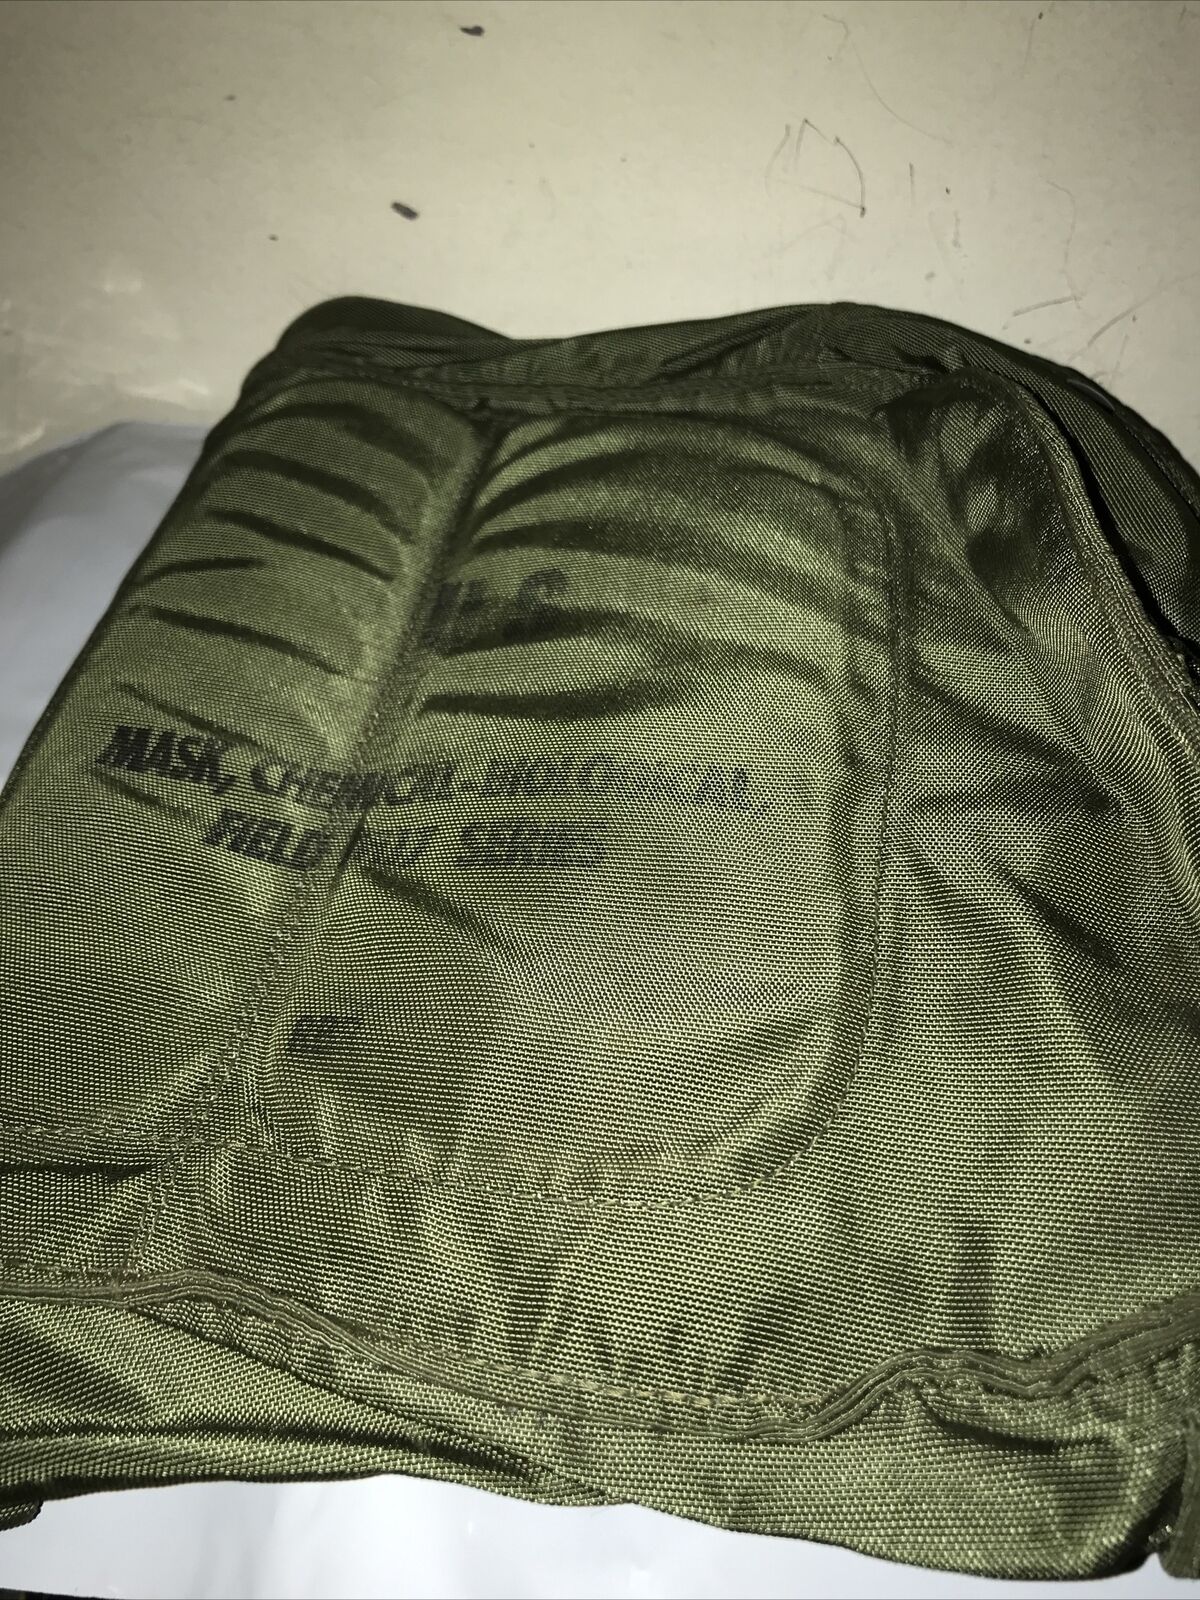 US ARMY GAS Mask Canvas Bag Chemical Biological Field M17 Series  Bag Only